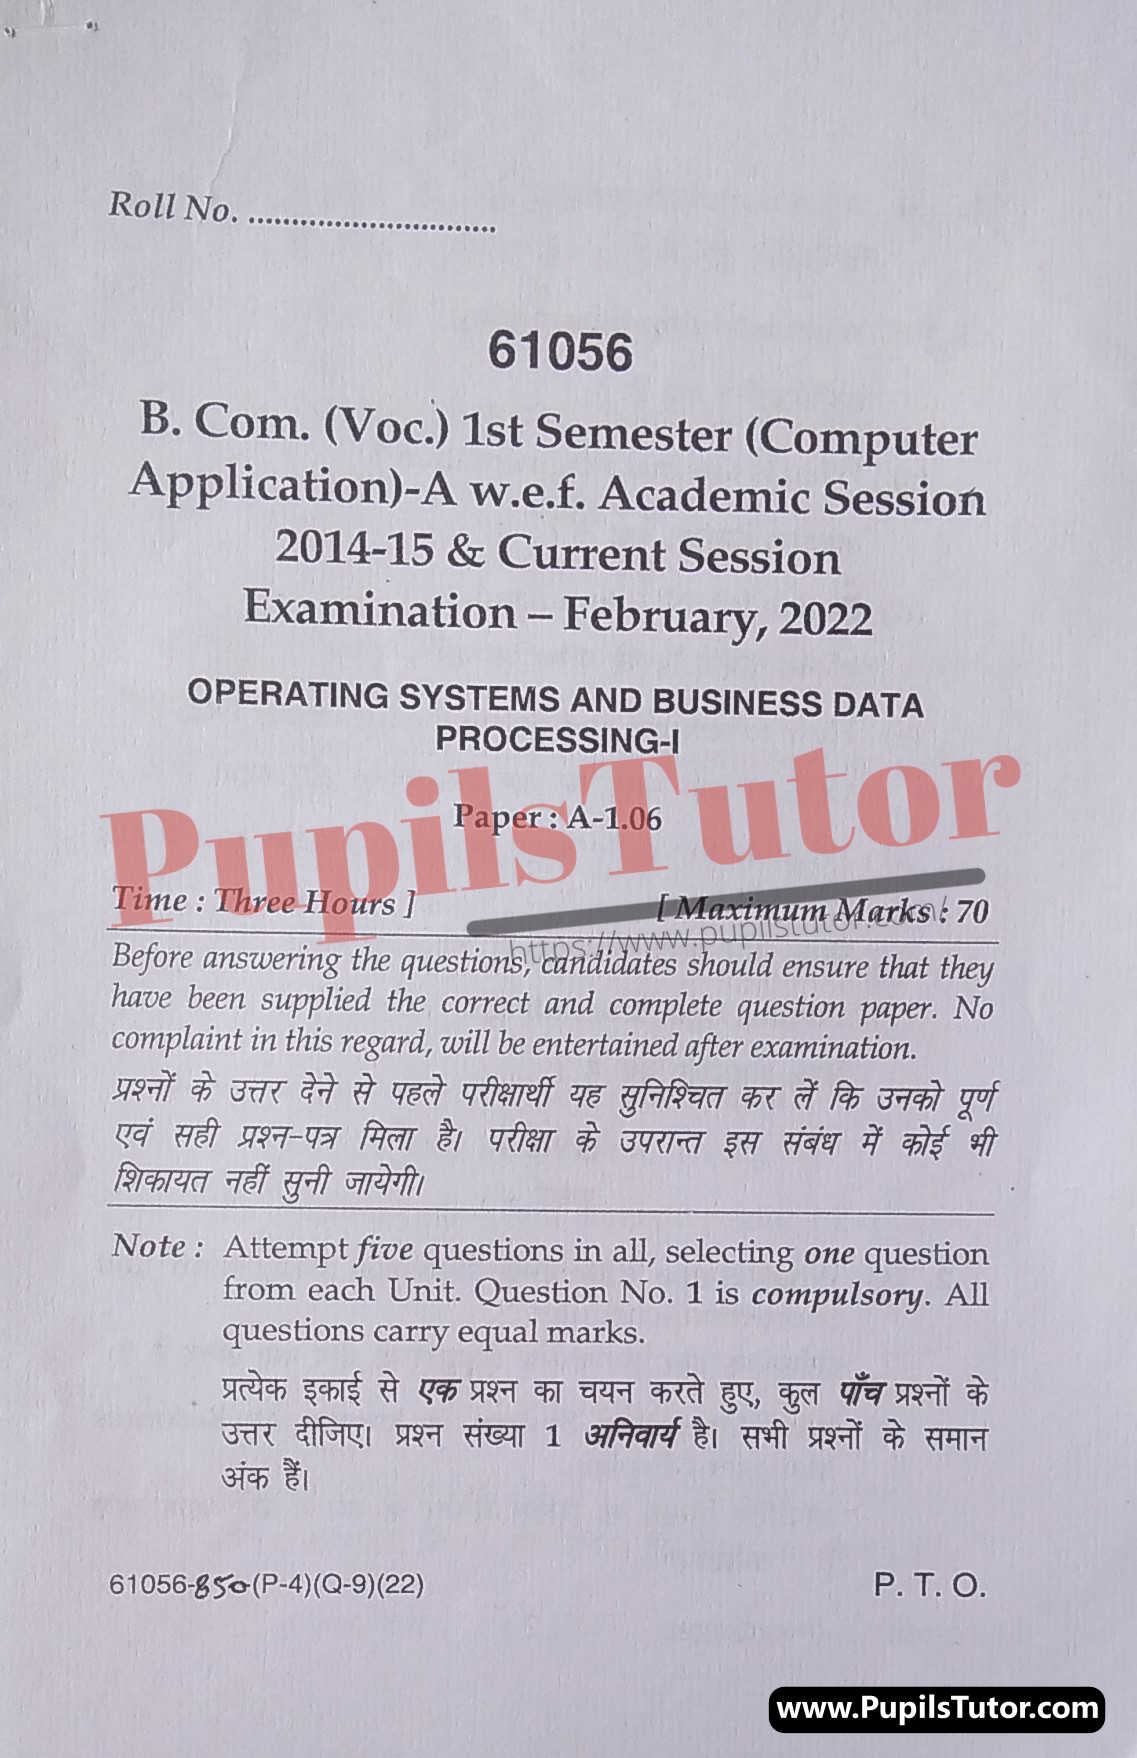 MDU (Maharshi Dayanand University, Rohtak Haryana) Bcom (Voc.) Vocational First Semester Previous Year Operating System And Business Data Processing Question Paper For February, 2022 Exam (Question Paper Page 1) - pupilstutor.com